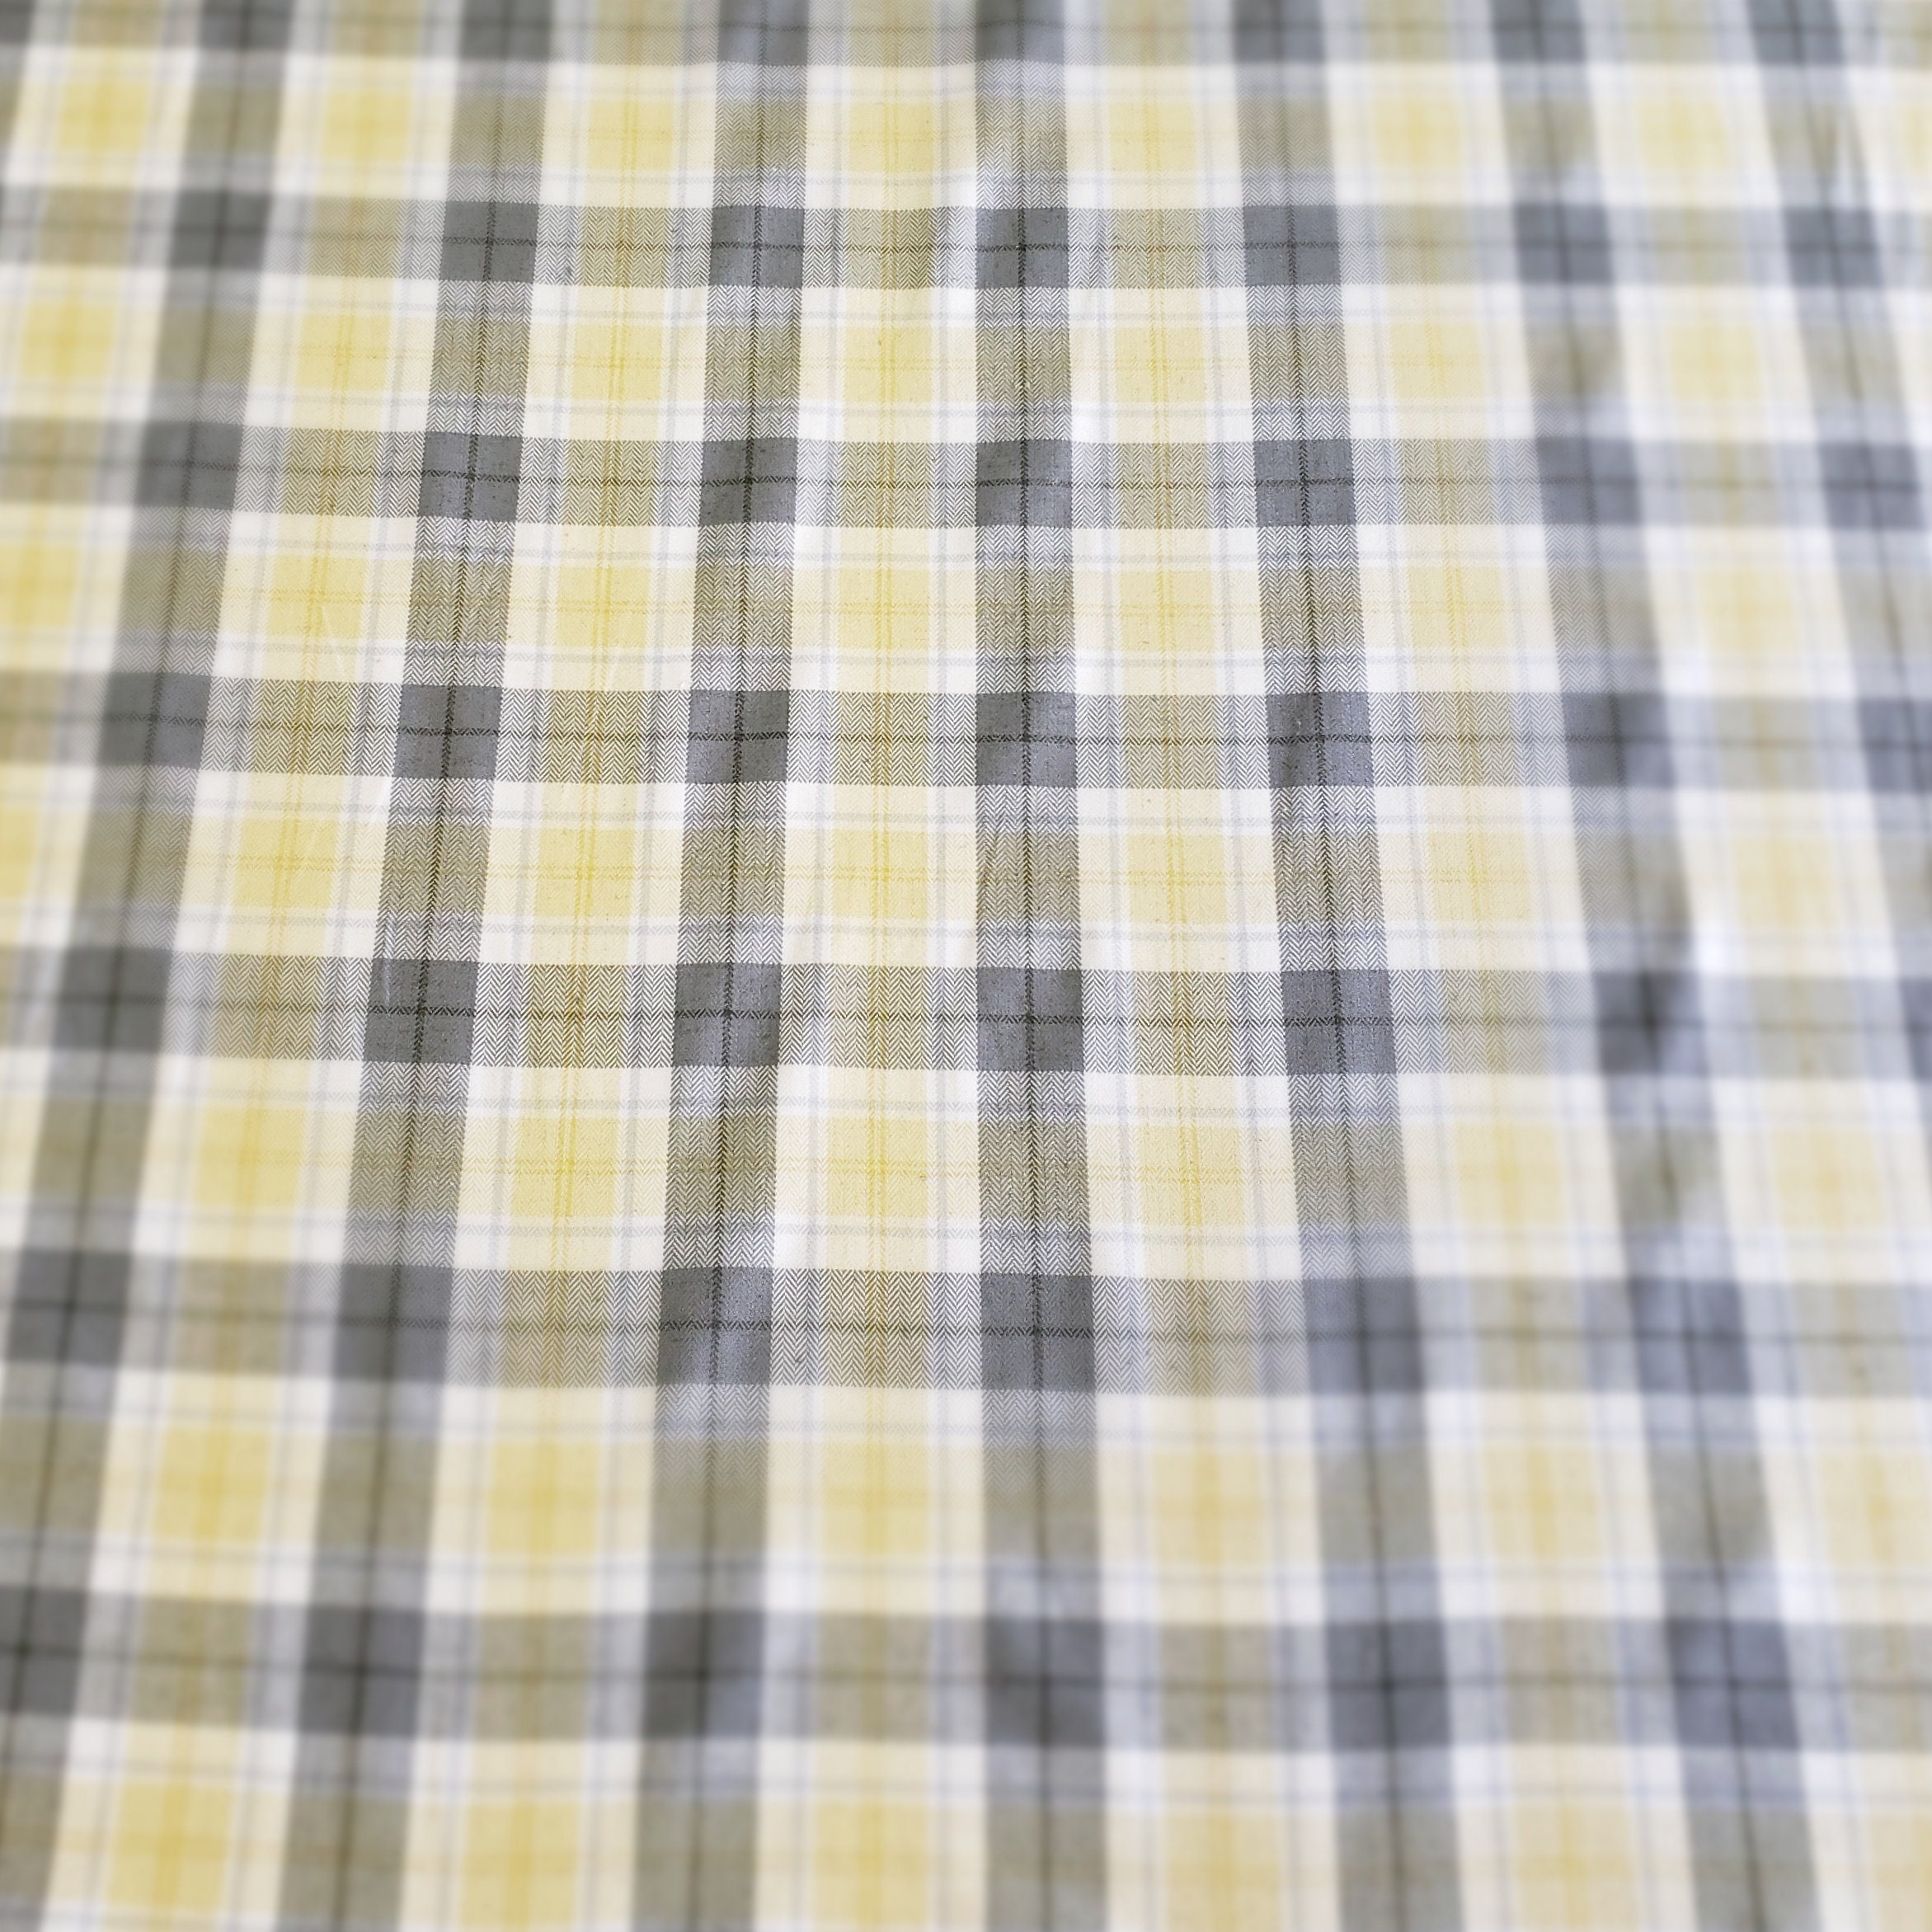 Fresh soft colored woven plaid in gray yellow & ivory | Etsy